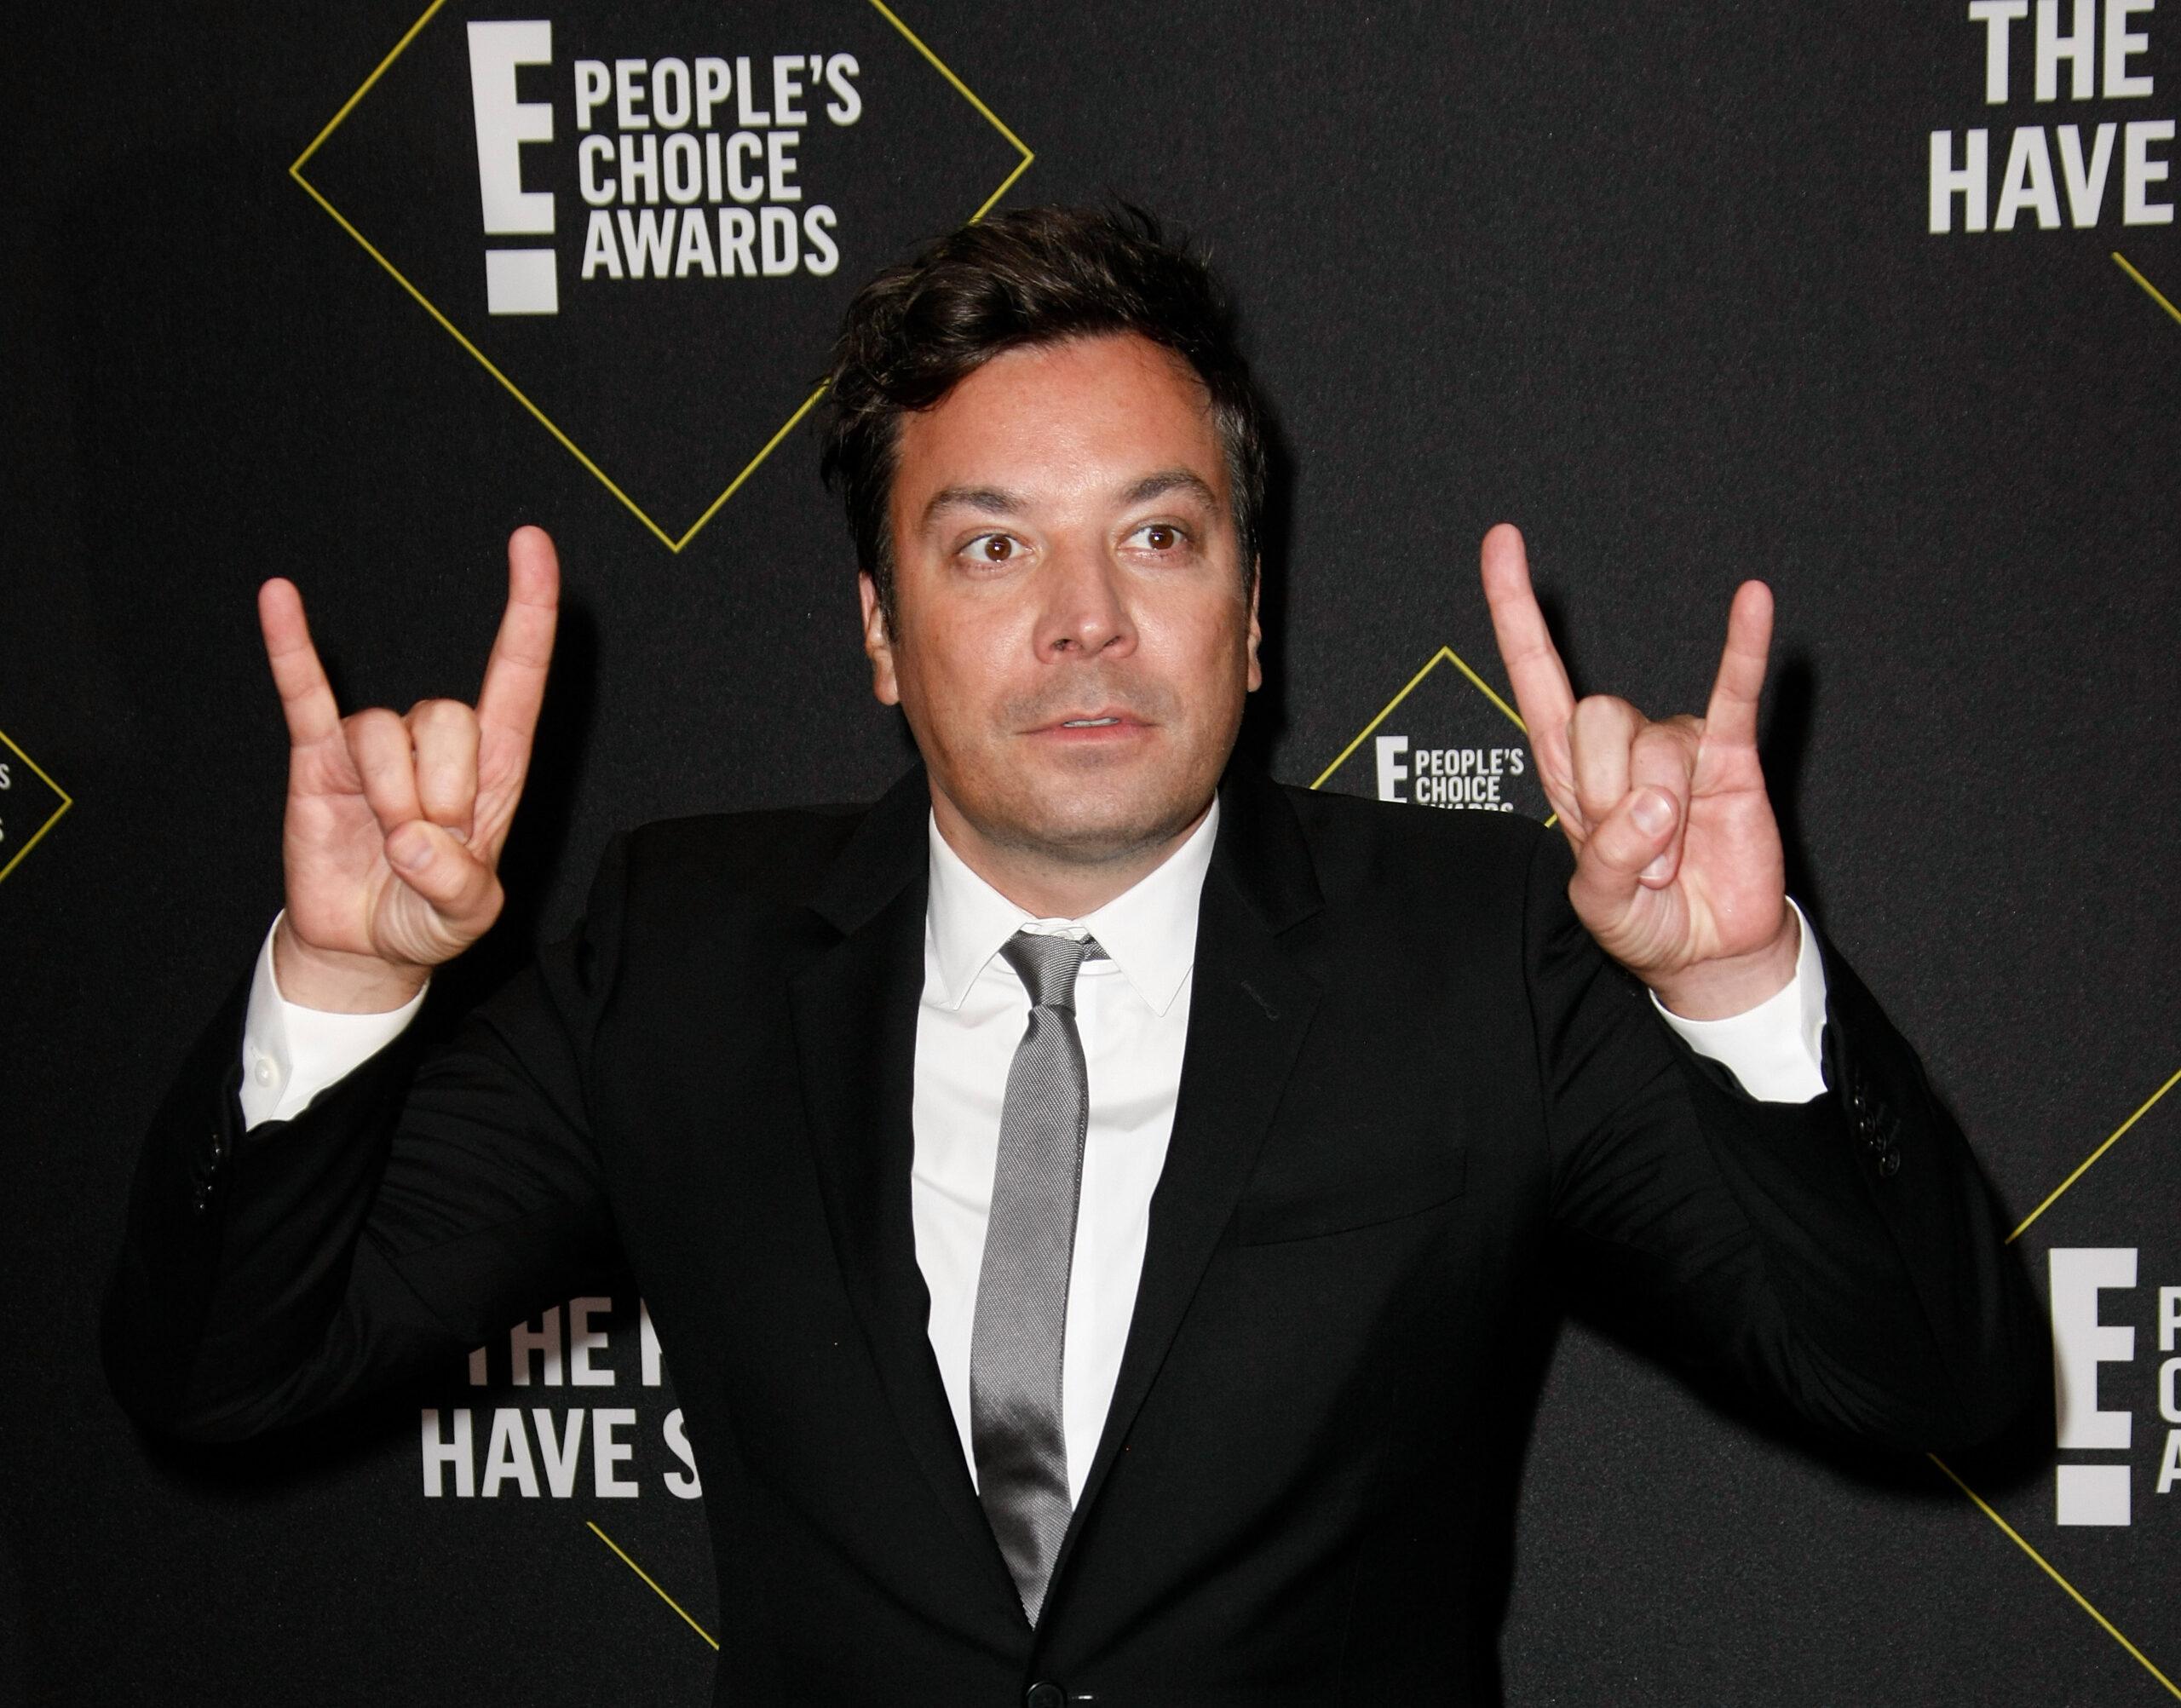 Jimmy Fallon receives flak from social media after toxic work environment allegations